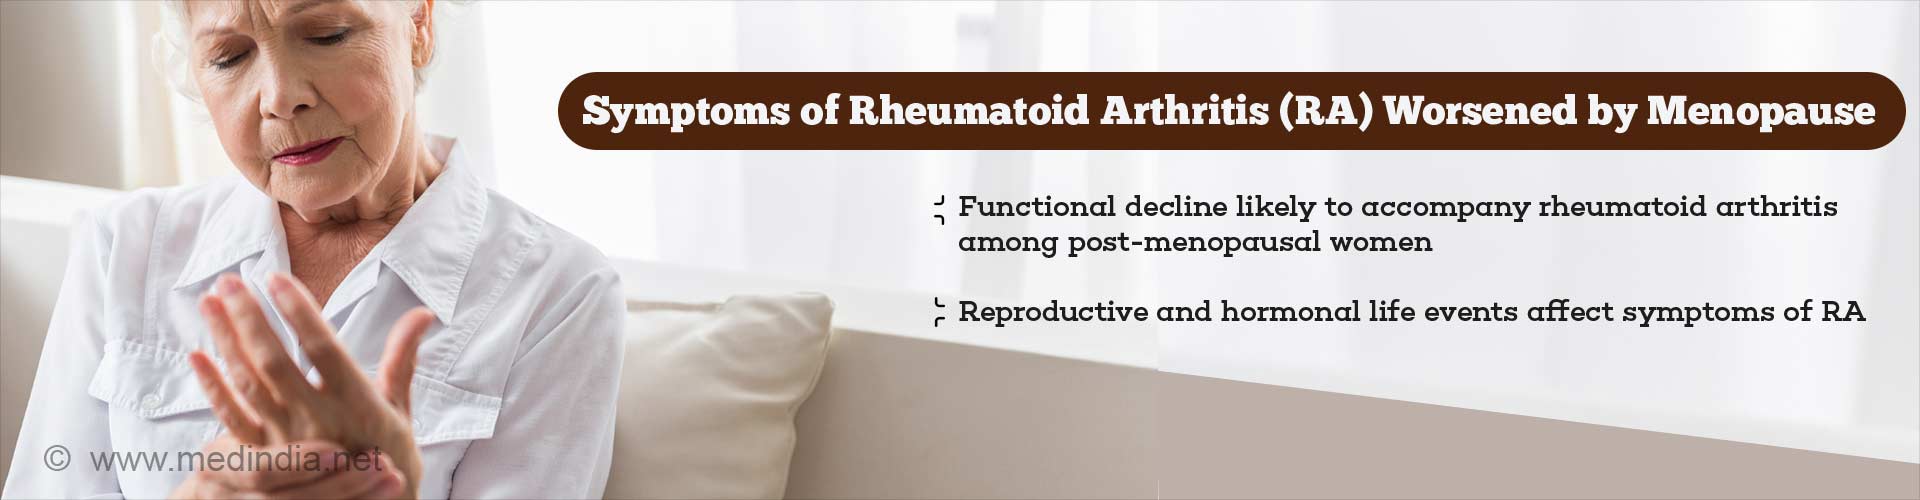 symptoms of rheumatoid arthritis (RA) worsened by menopause
- functional decline likely to accompany rheumatiod arthritis among post-menopause women
- reproductive and hormonal life events affect symptoms of RA